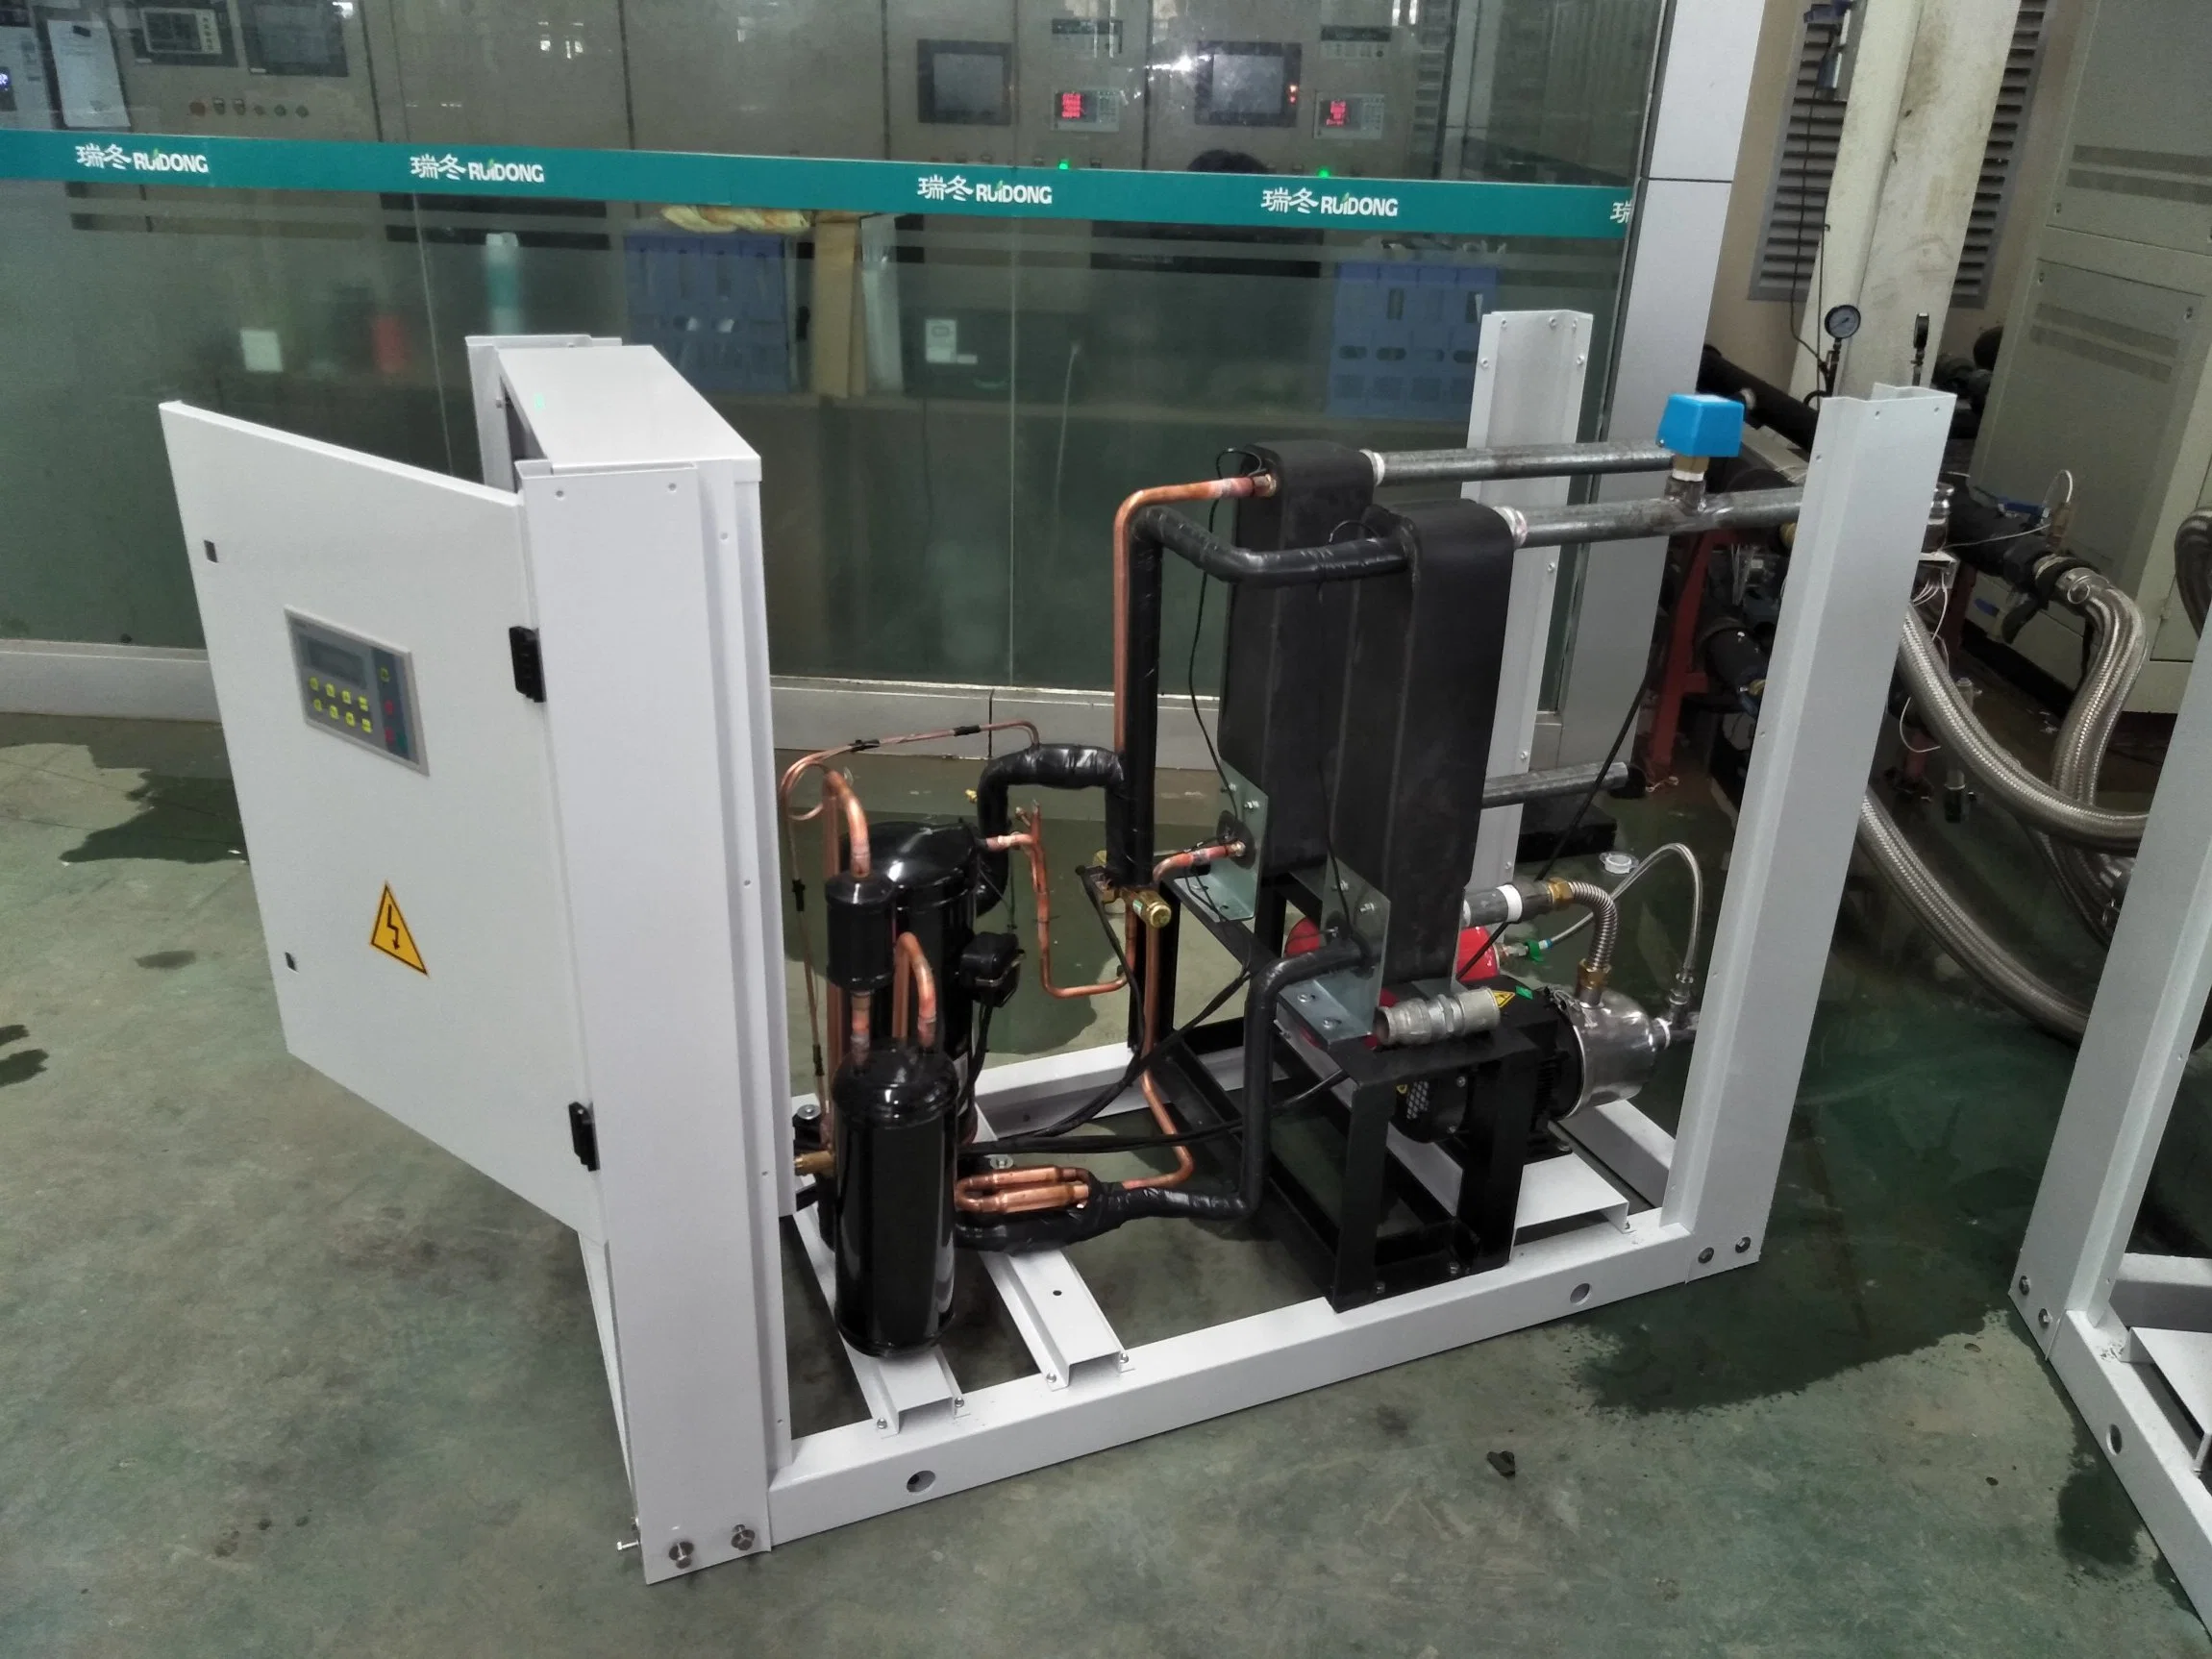 Industrial Water Cooled Scroll Chiller Used for Industrial Refrigeration